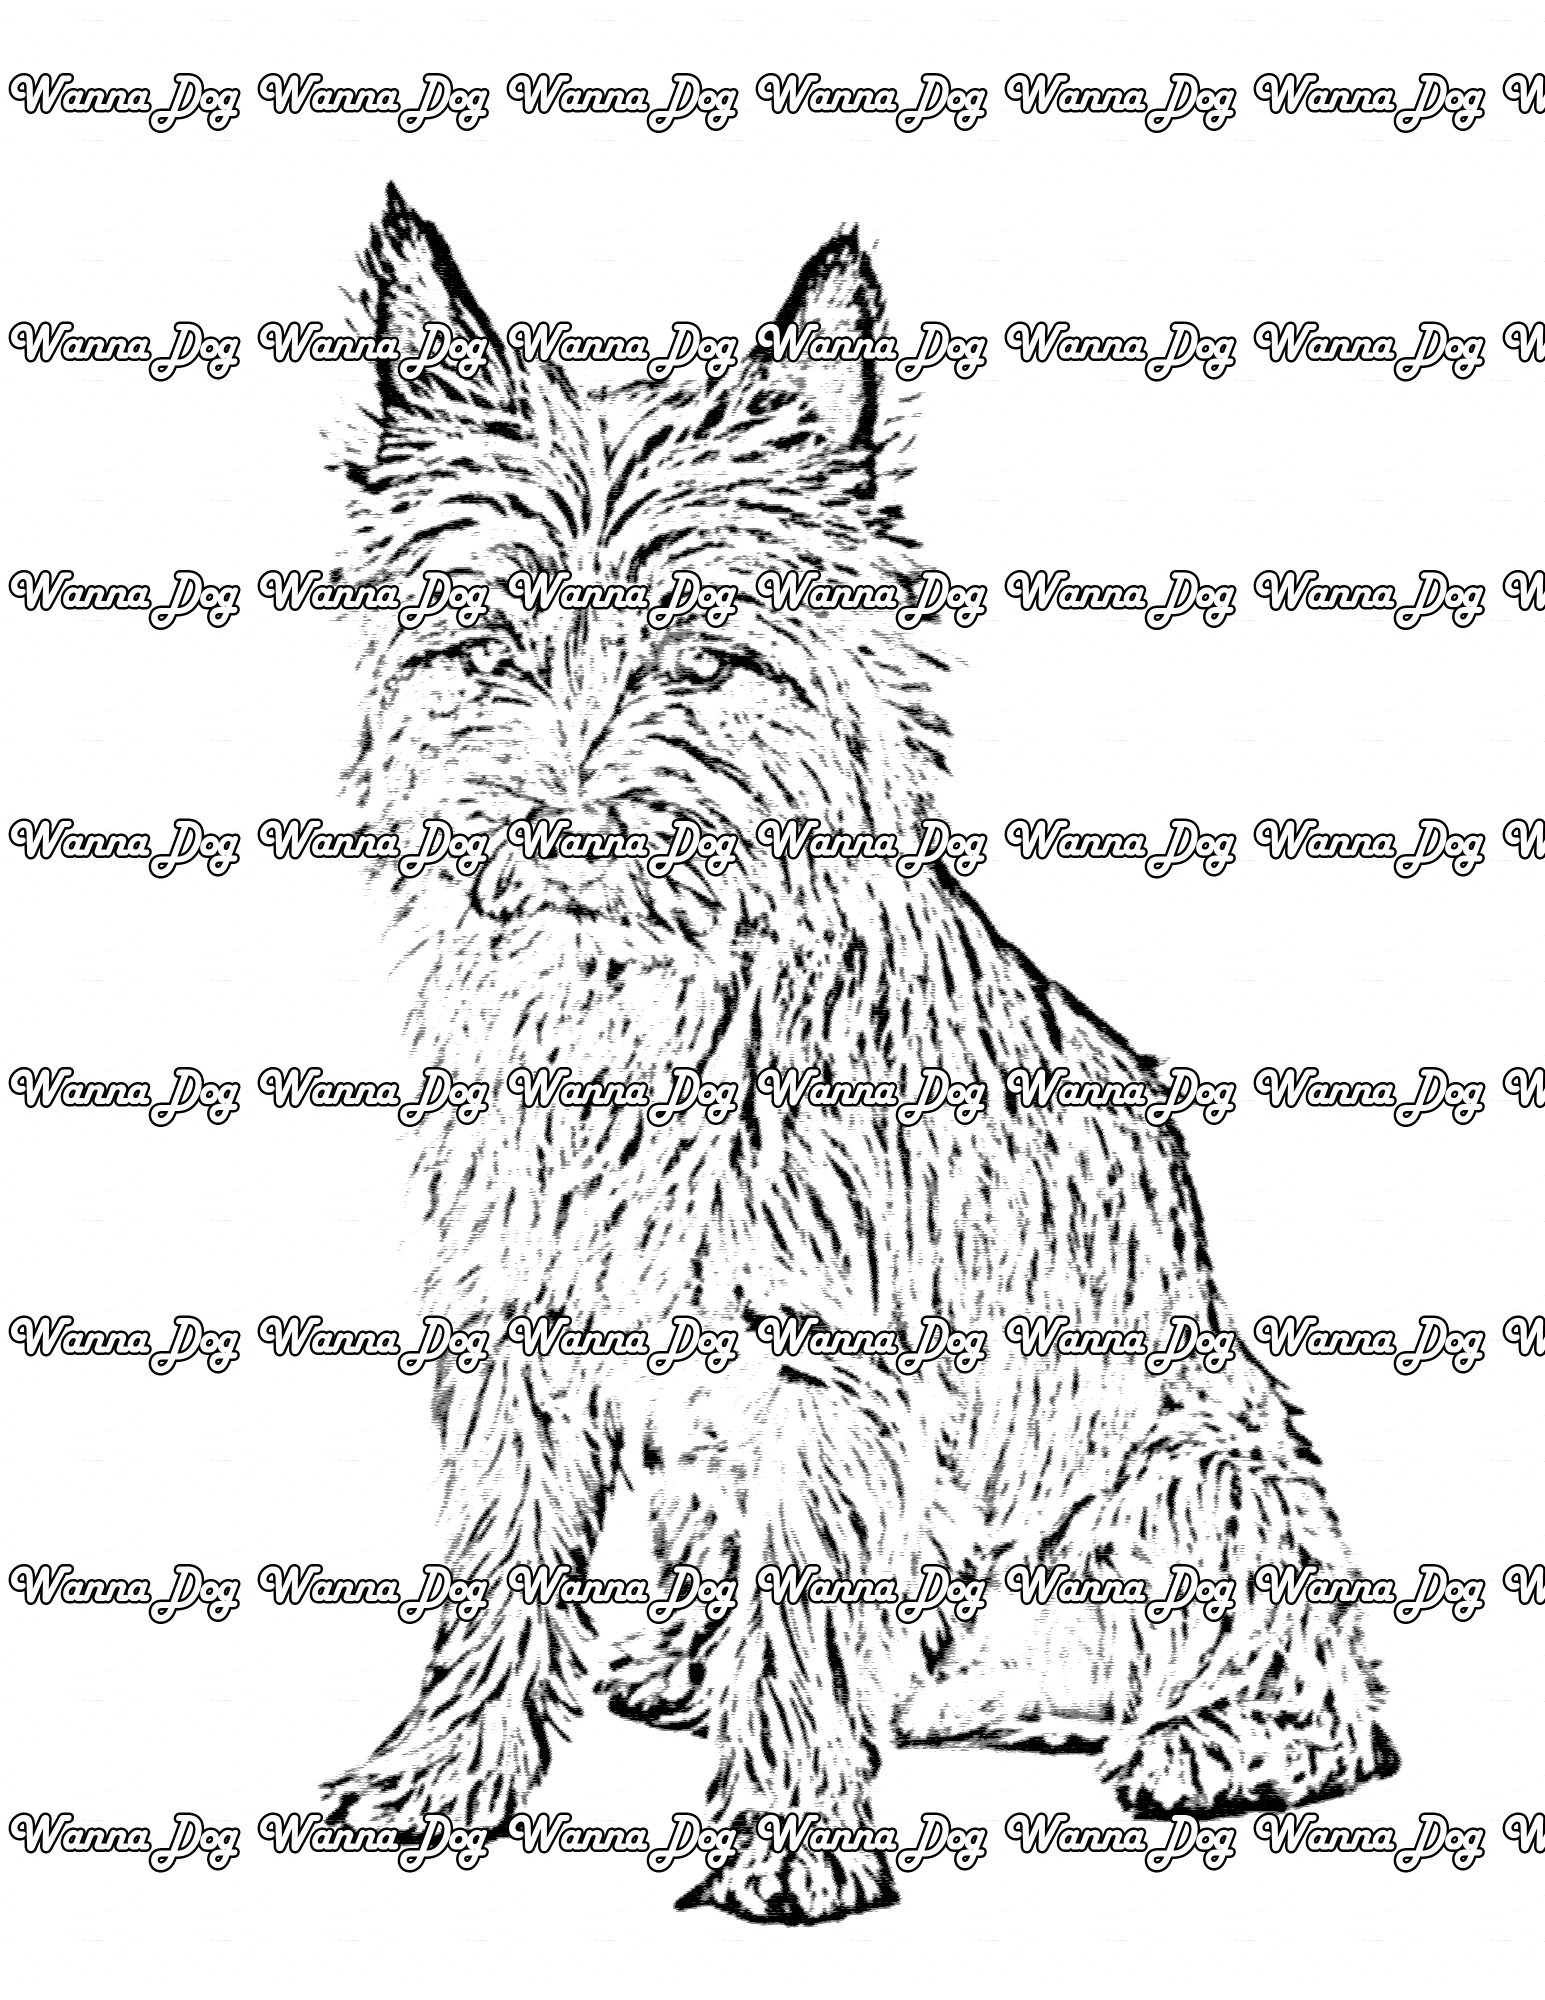 Cairn Terrier Coloring Page of a Cairn Terrier sitting